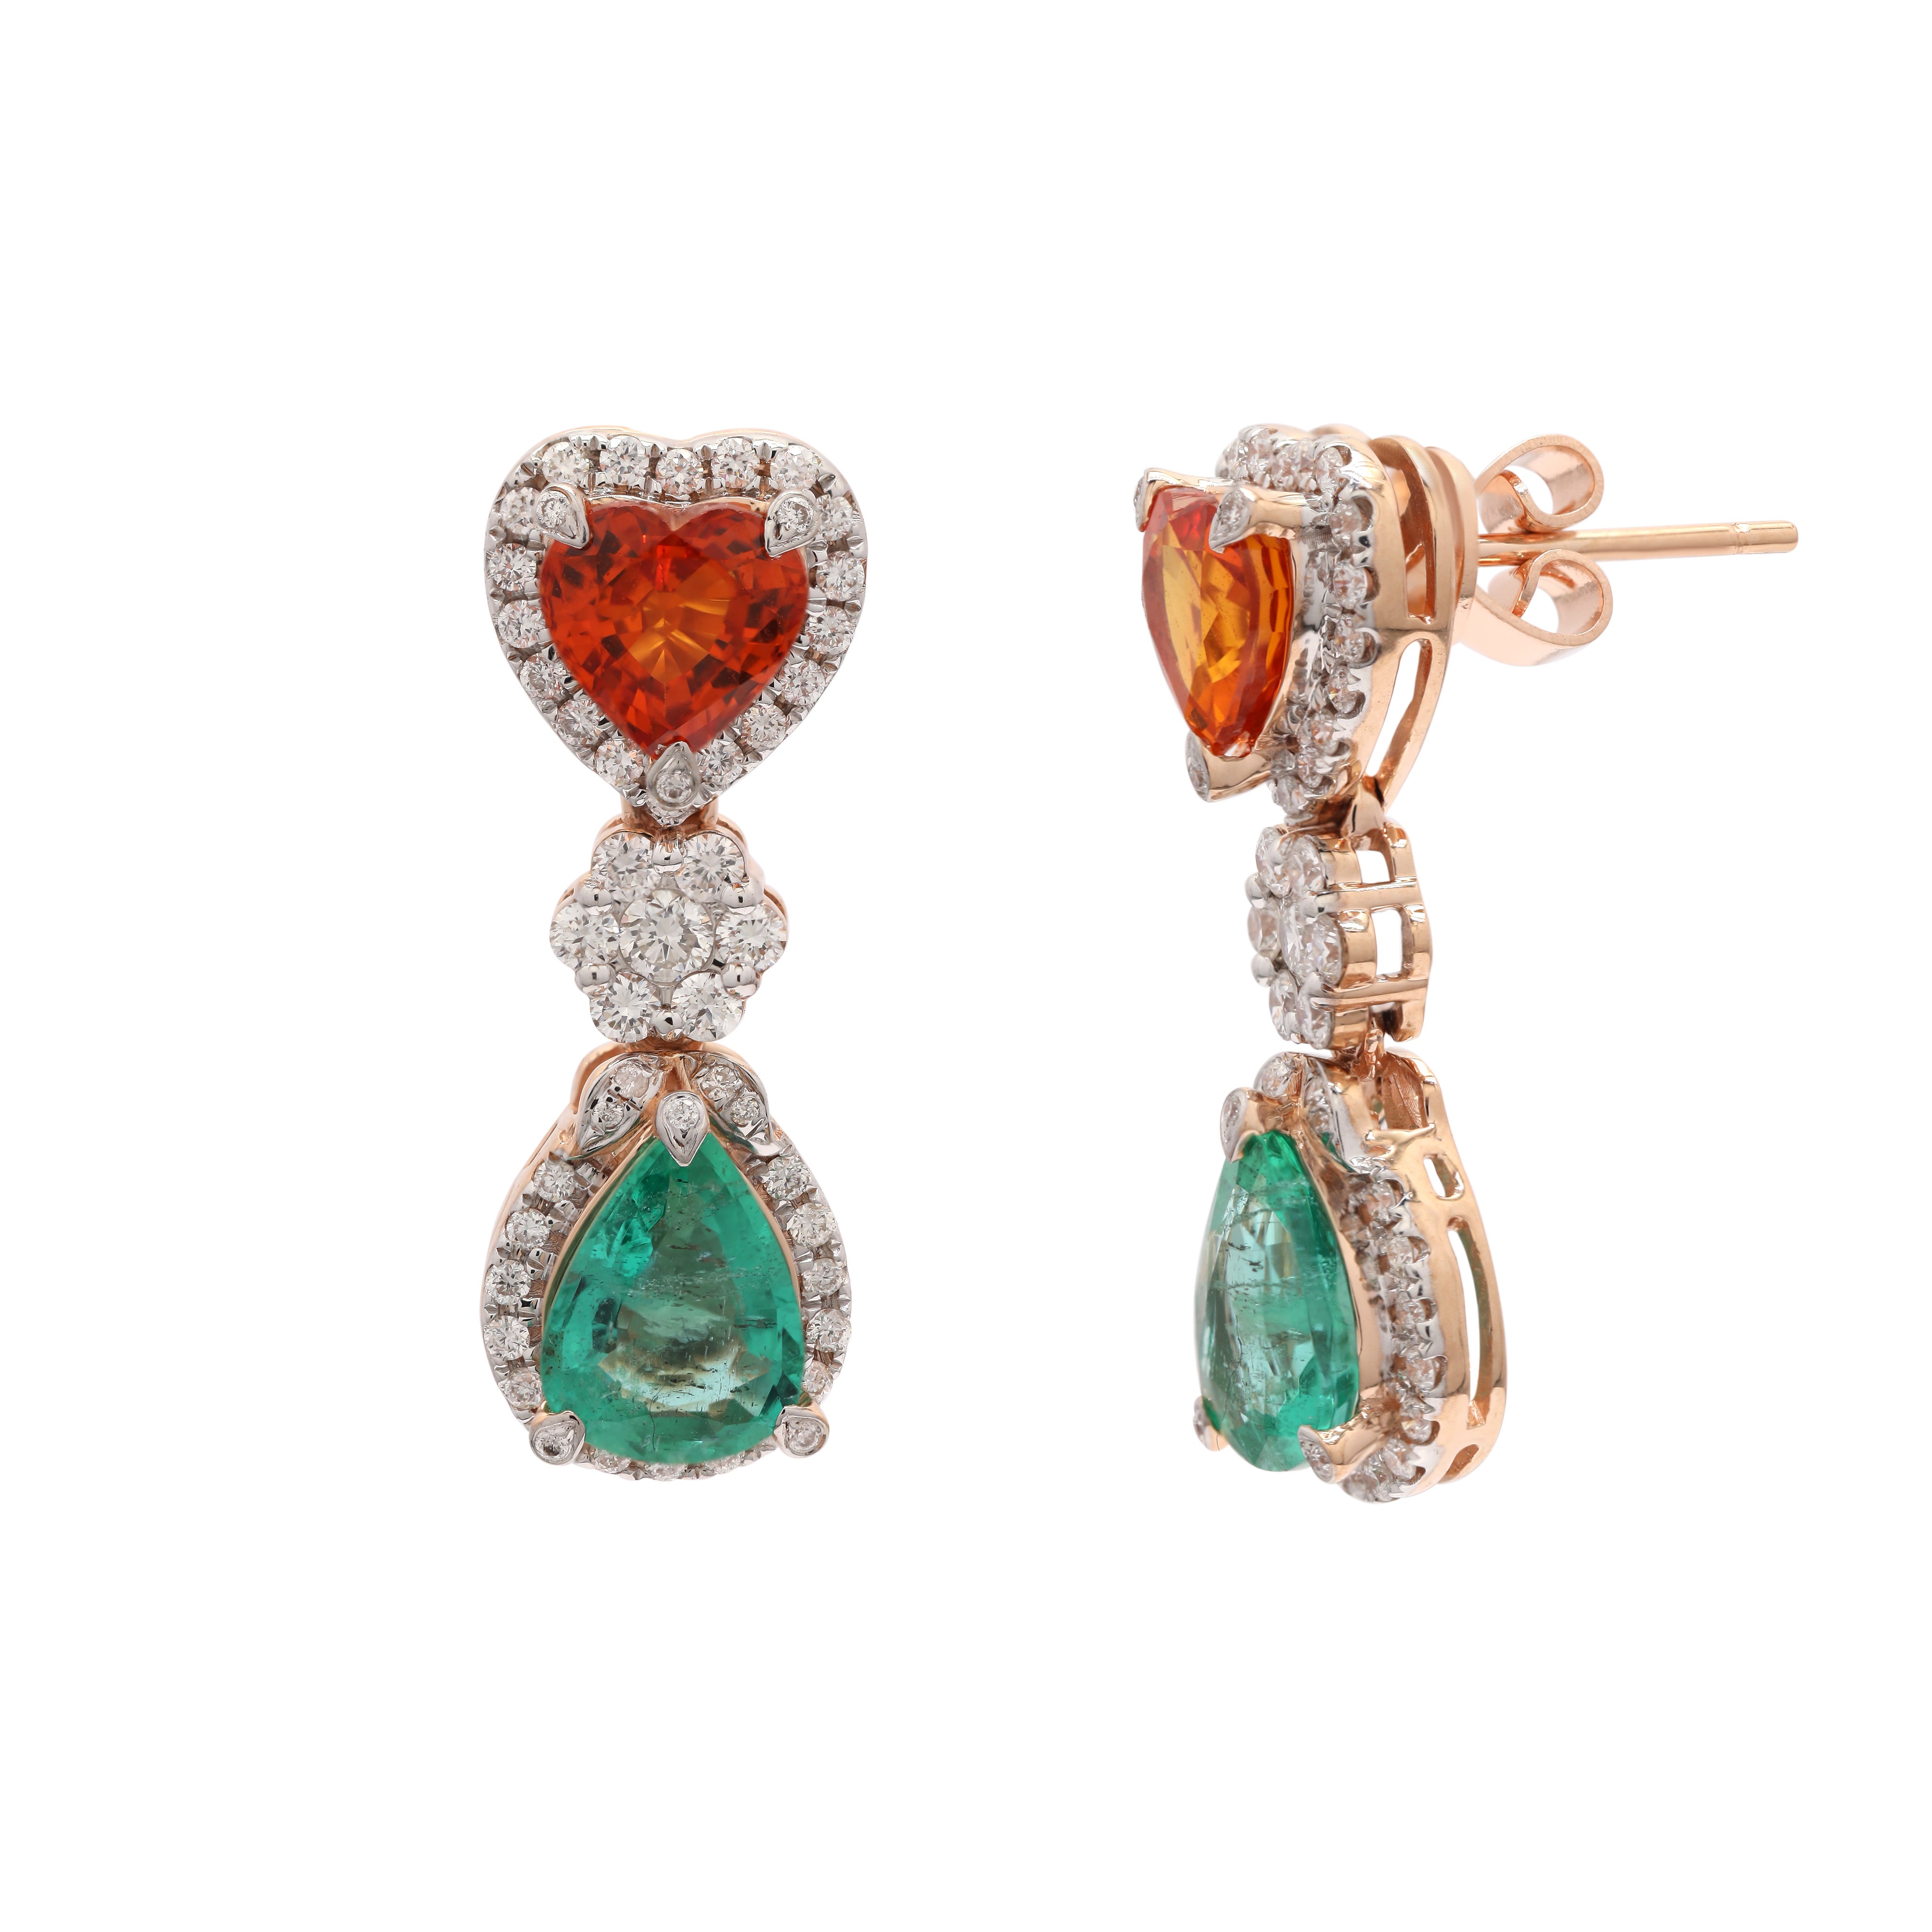 Sapphire and Emerald Dangle earrings to make a statement with your look. These earrings create a sparkling, luxurious look featuring heart and pear cut gemstone.
If you love to gravitate towards unique styles, this piece of jewelry is perfect for